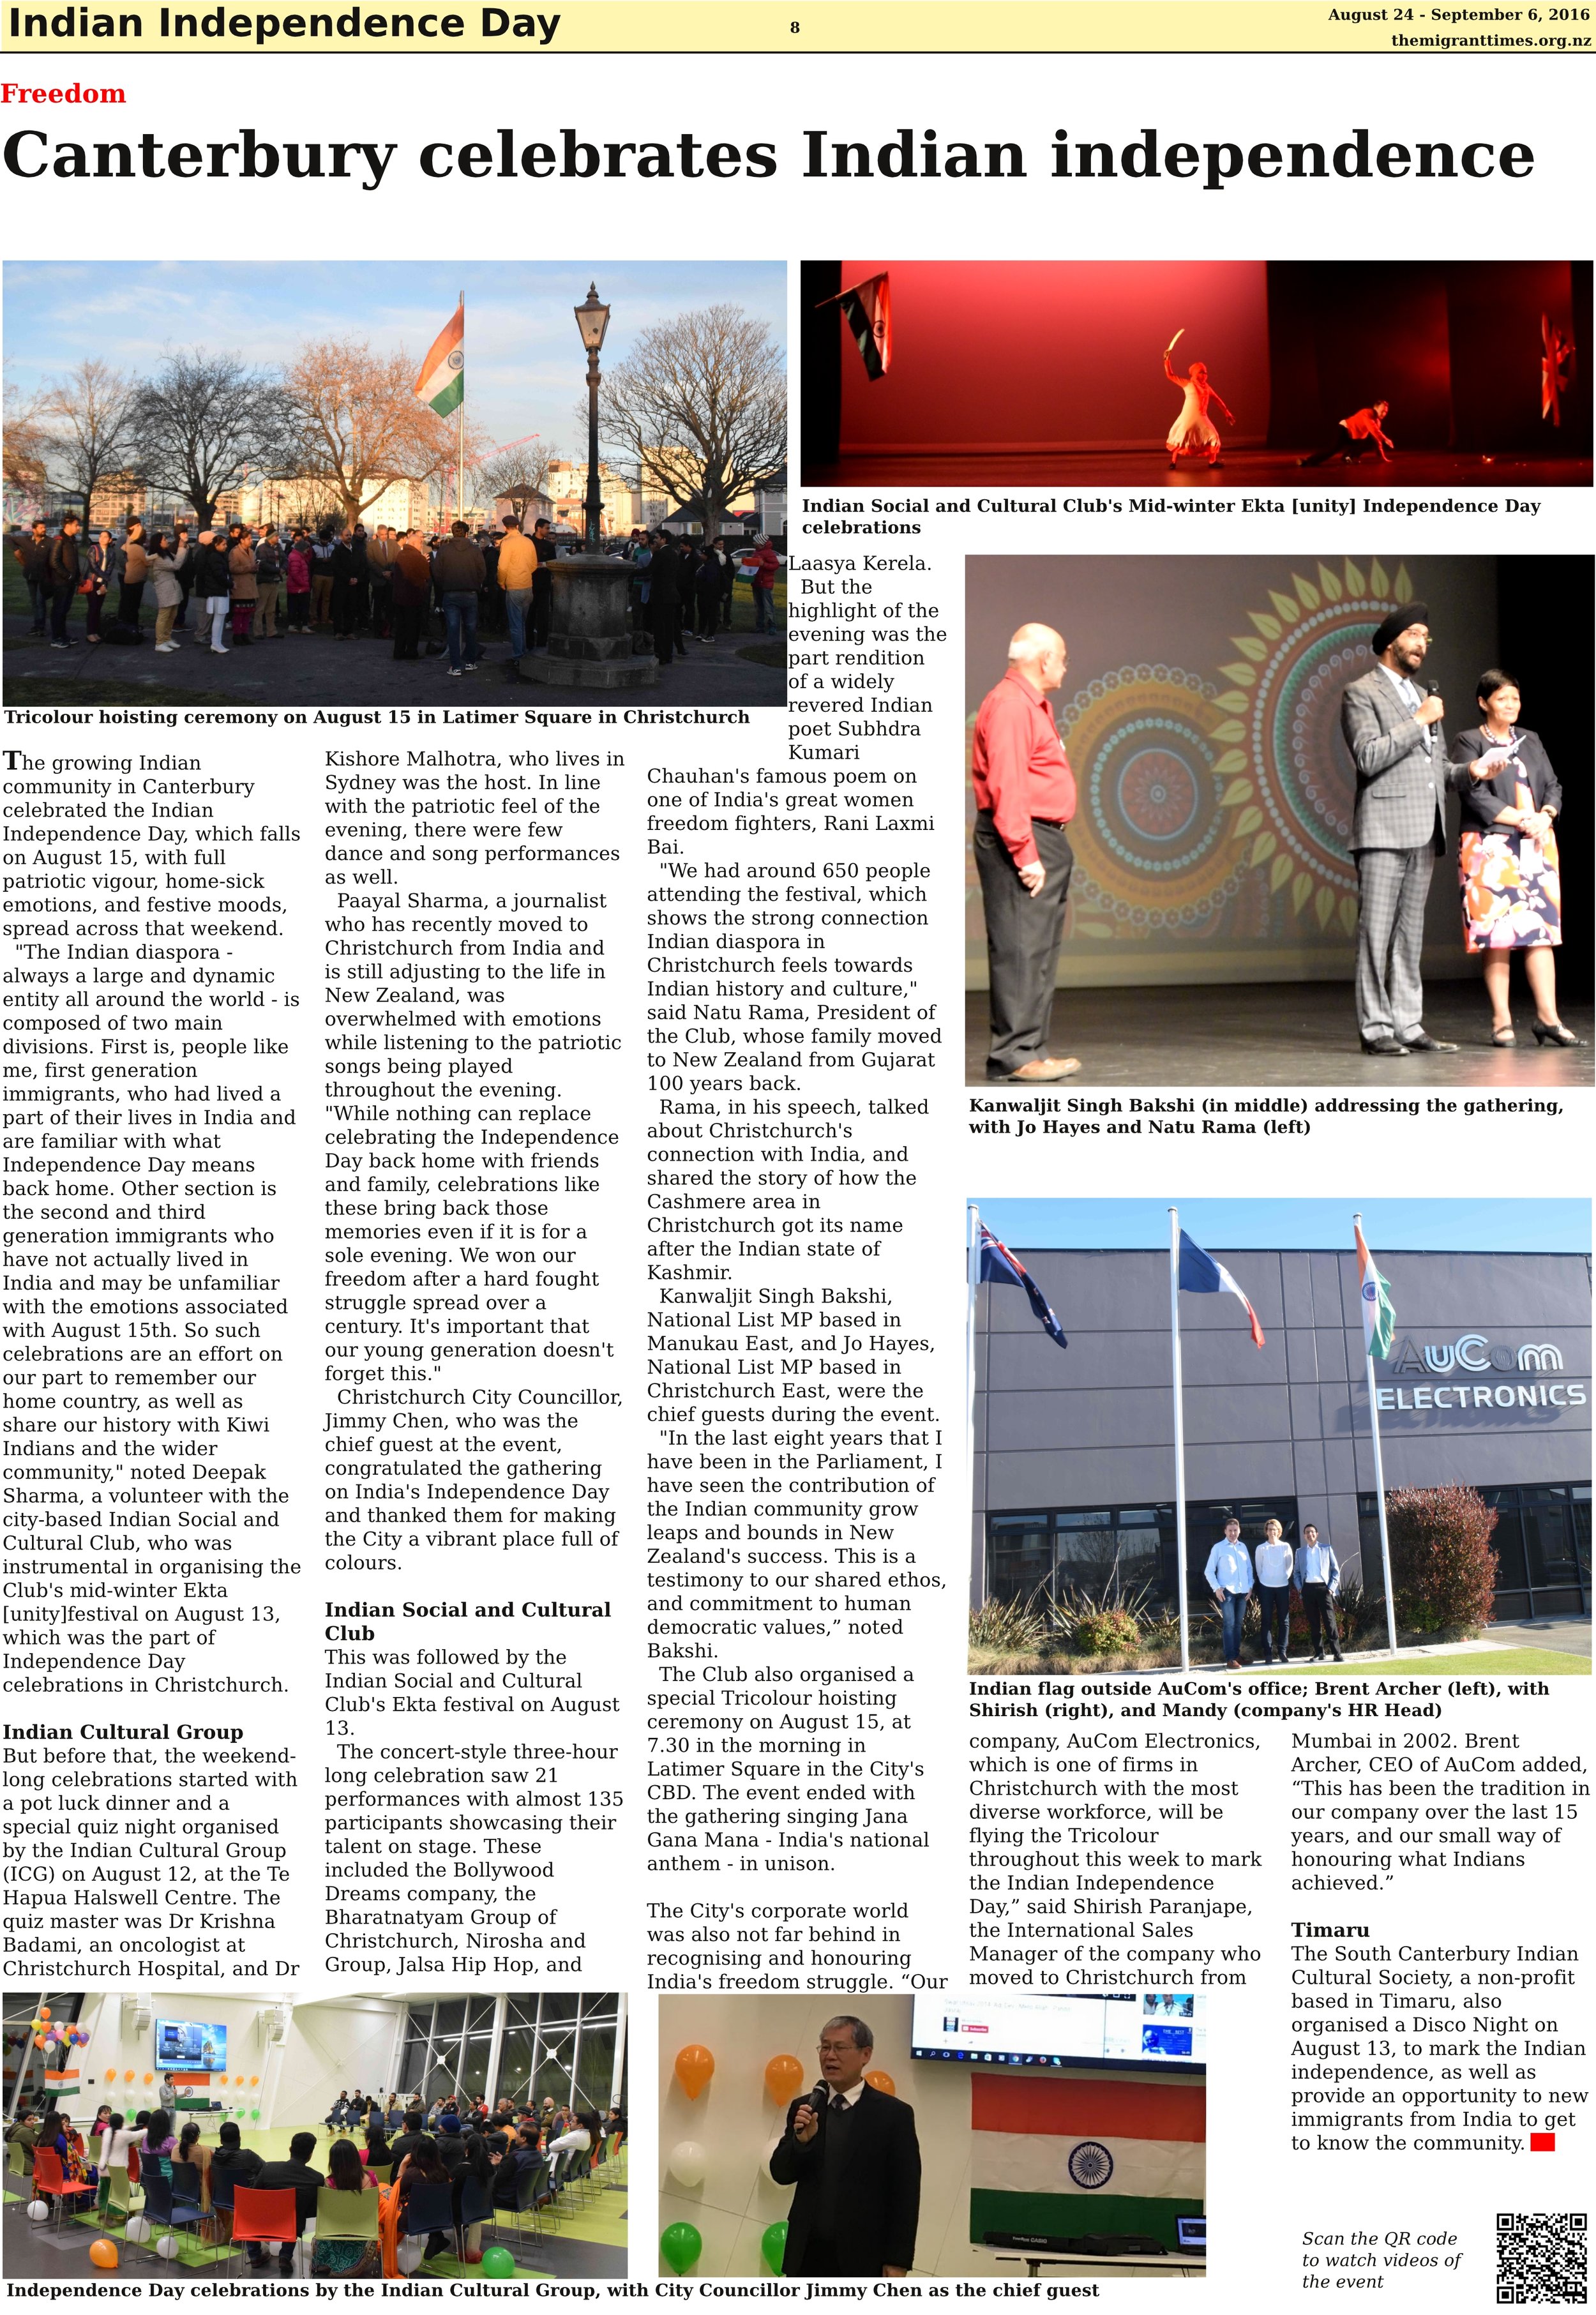  Click on the image to enlarge it and read the printed version of the story. 